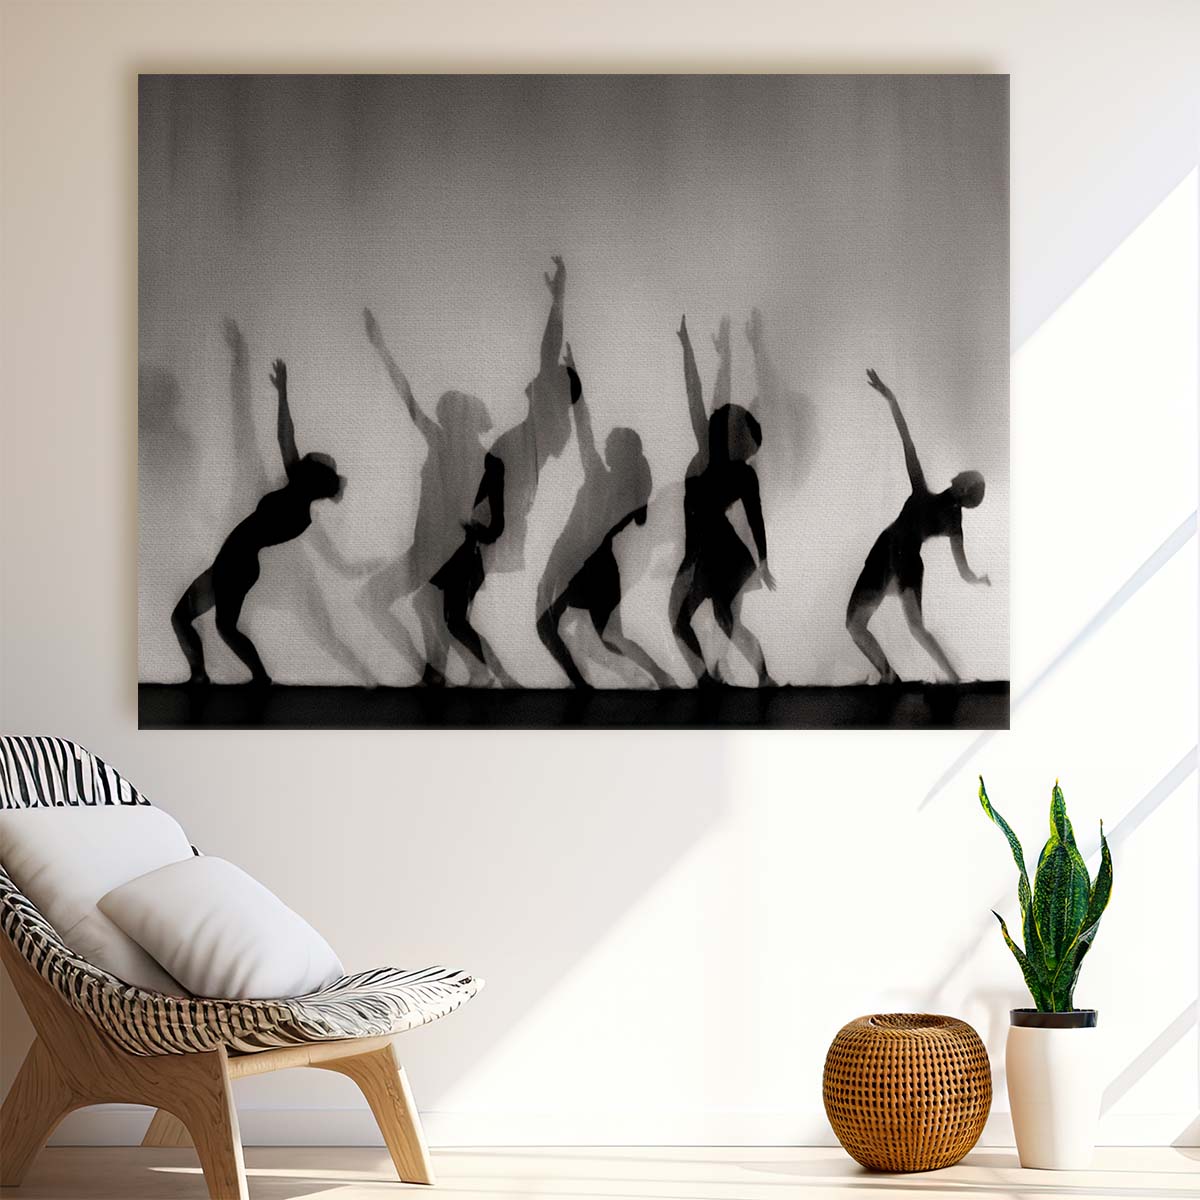 Monochrome Dancer Silhouettes Abstract Wall Art by Luxuriance Designs. Made in USA.